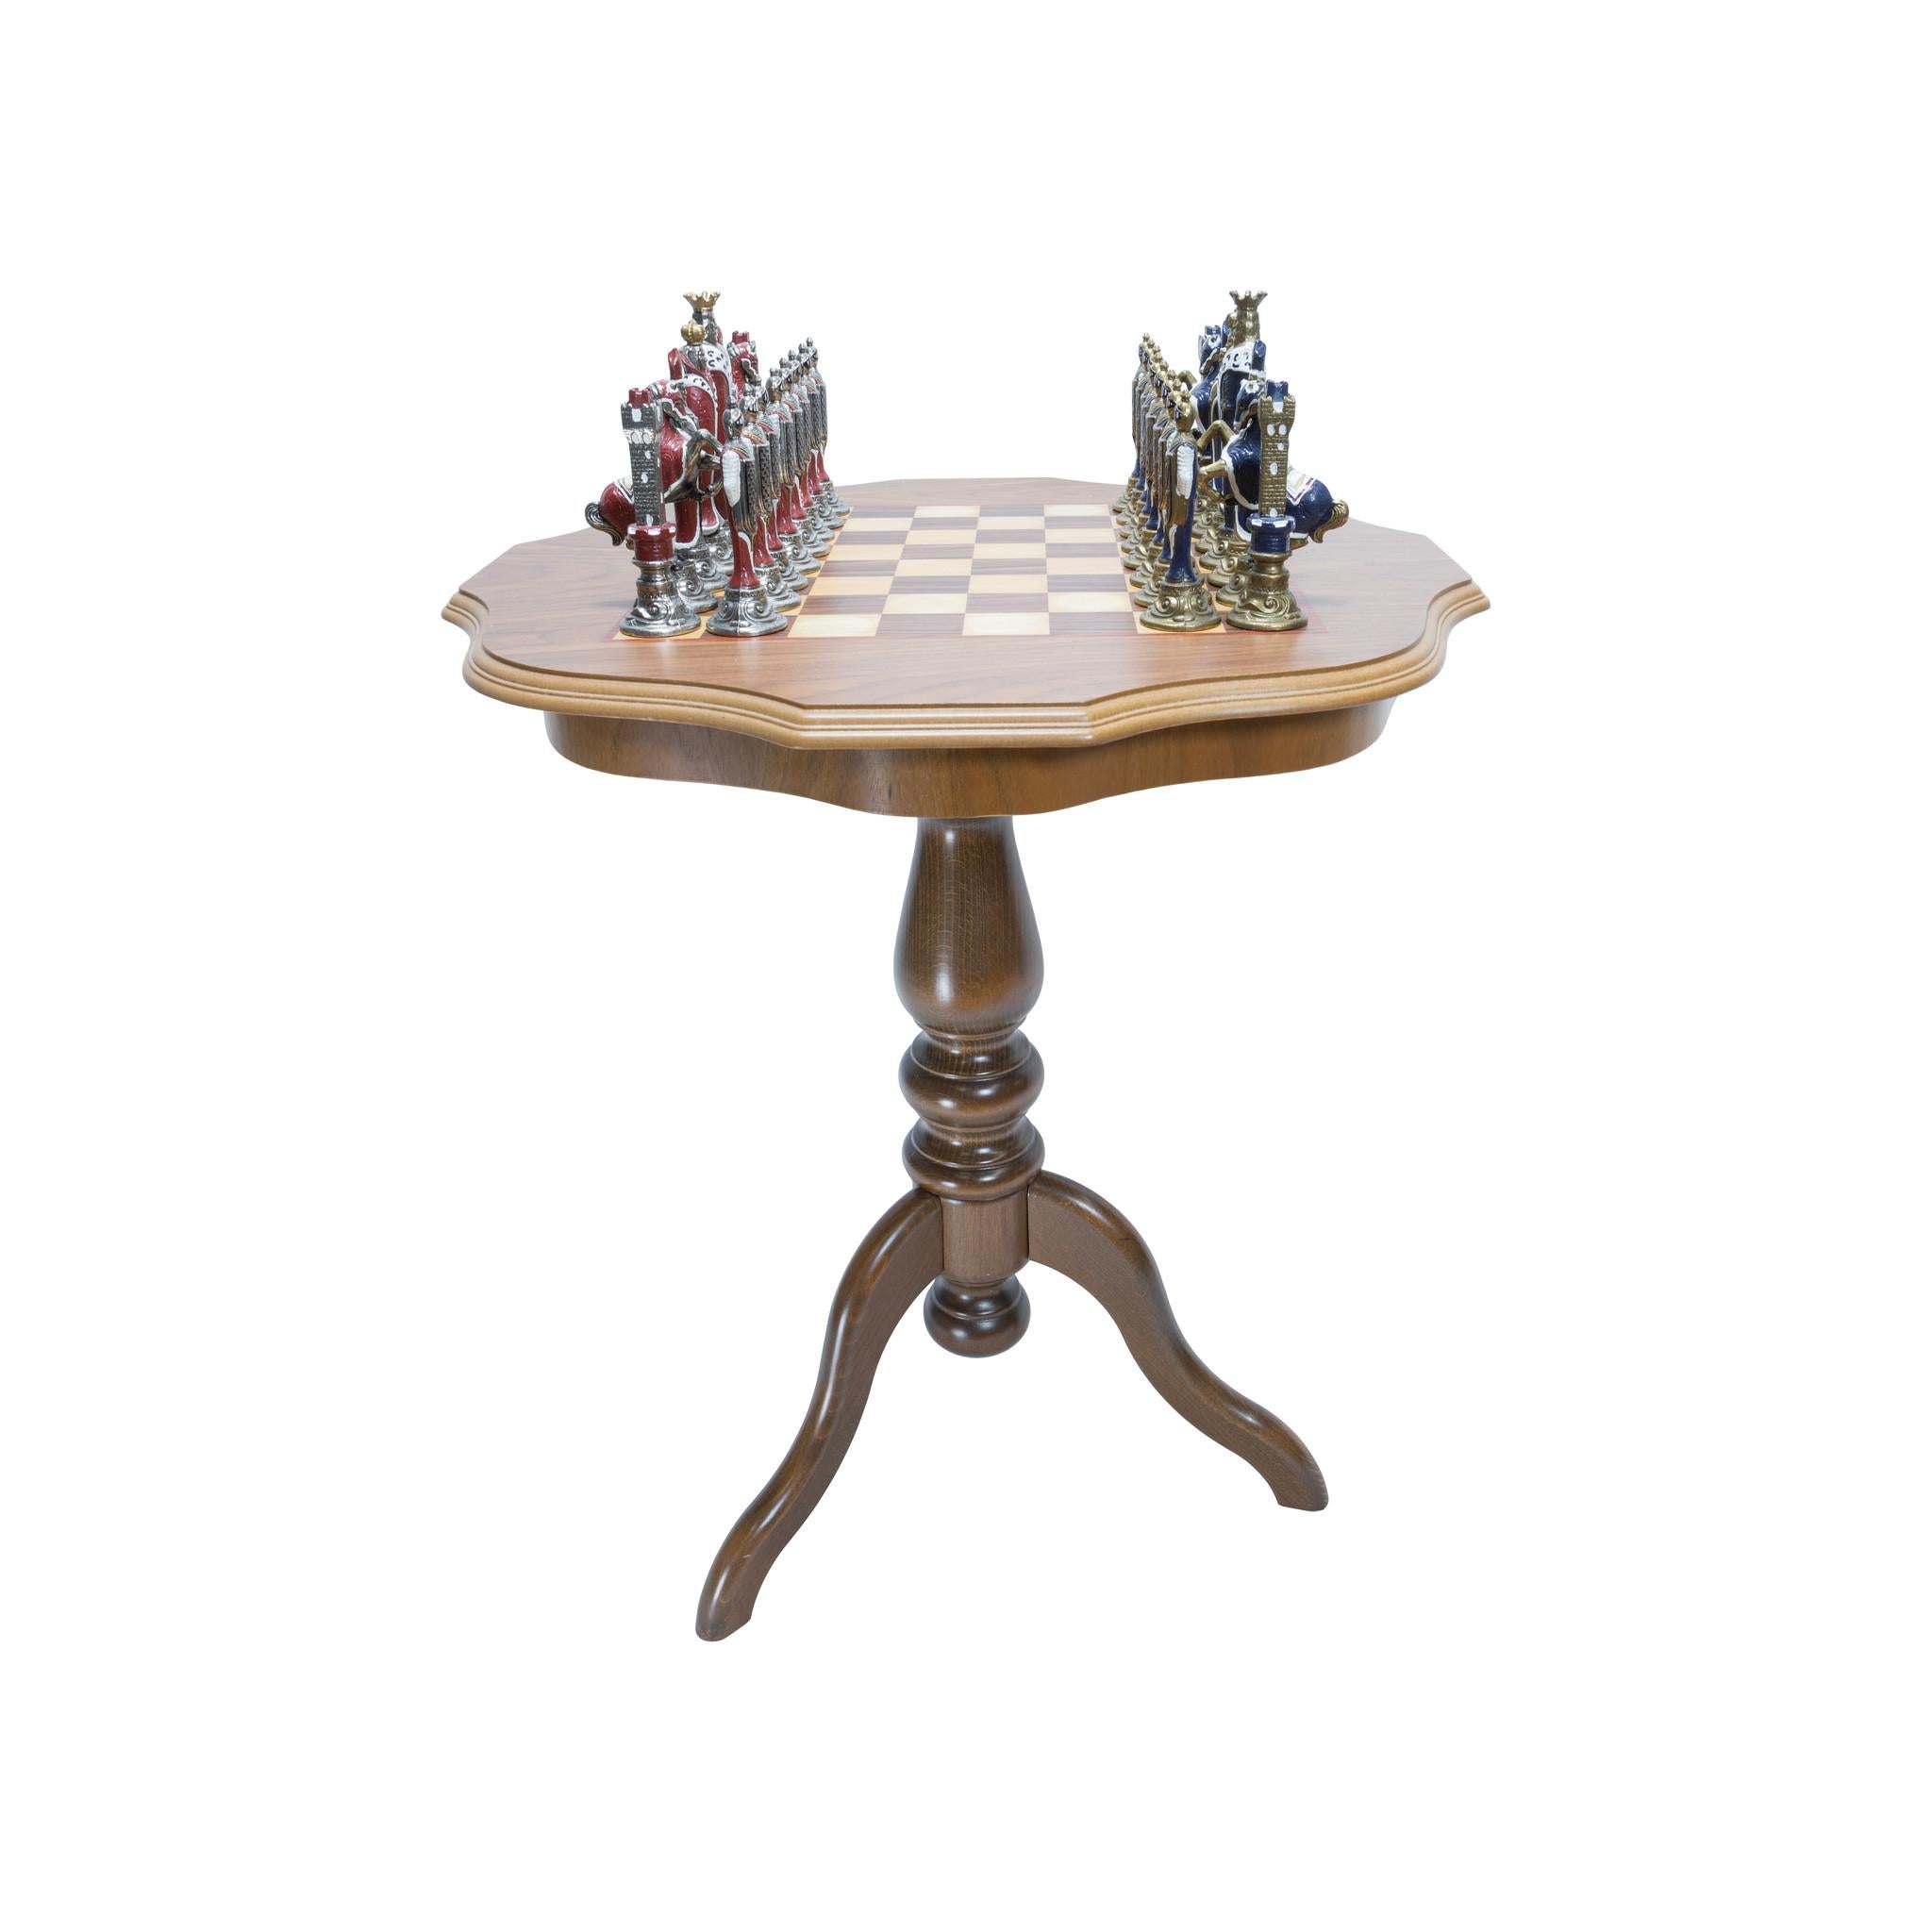 Vintage Italian enameled chess set and table. Italfama Renaissance complete chess set made of solid metal painted by hand. Colors on chess pieces are red and blue. The tallest pieces (Kings) 5 1/2